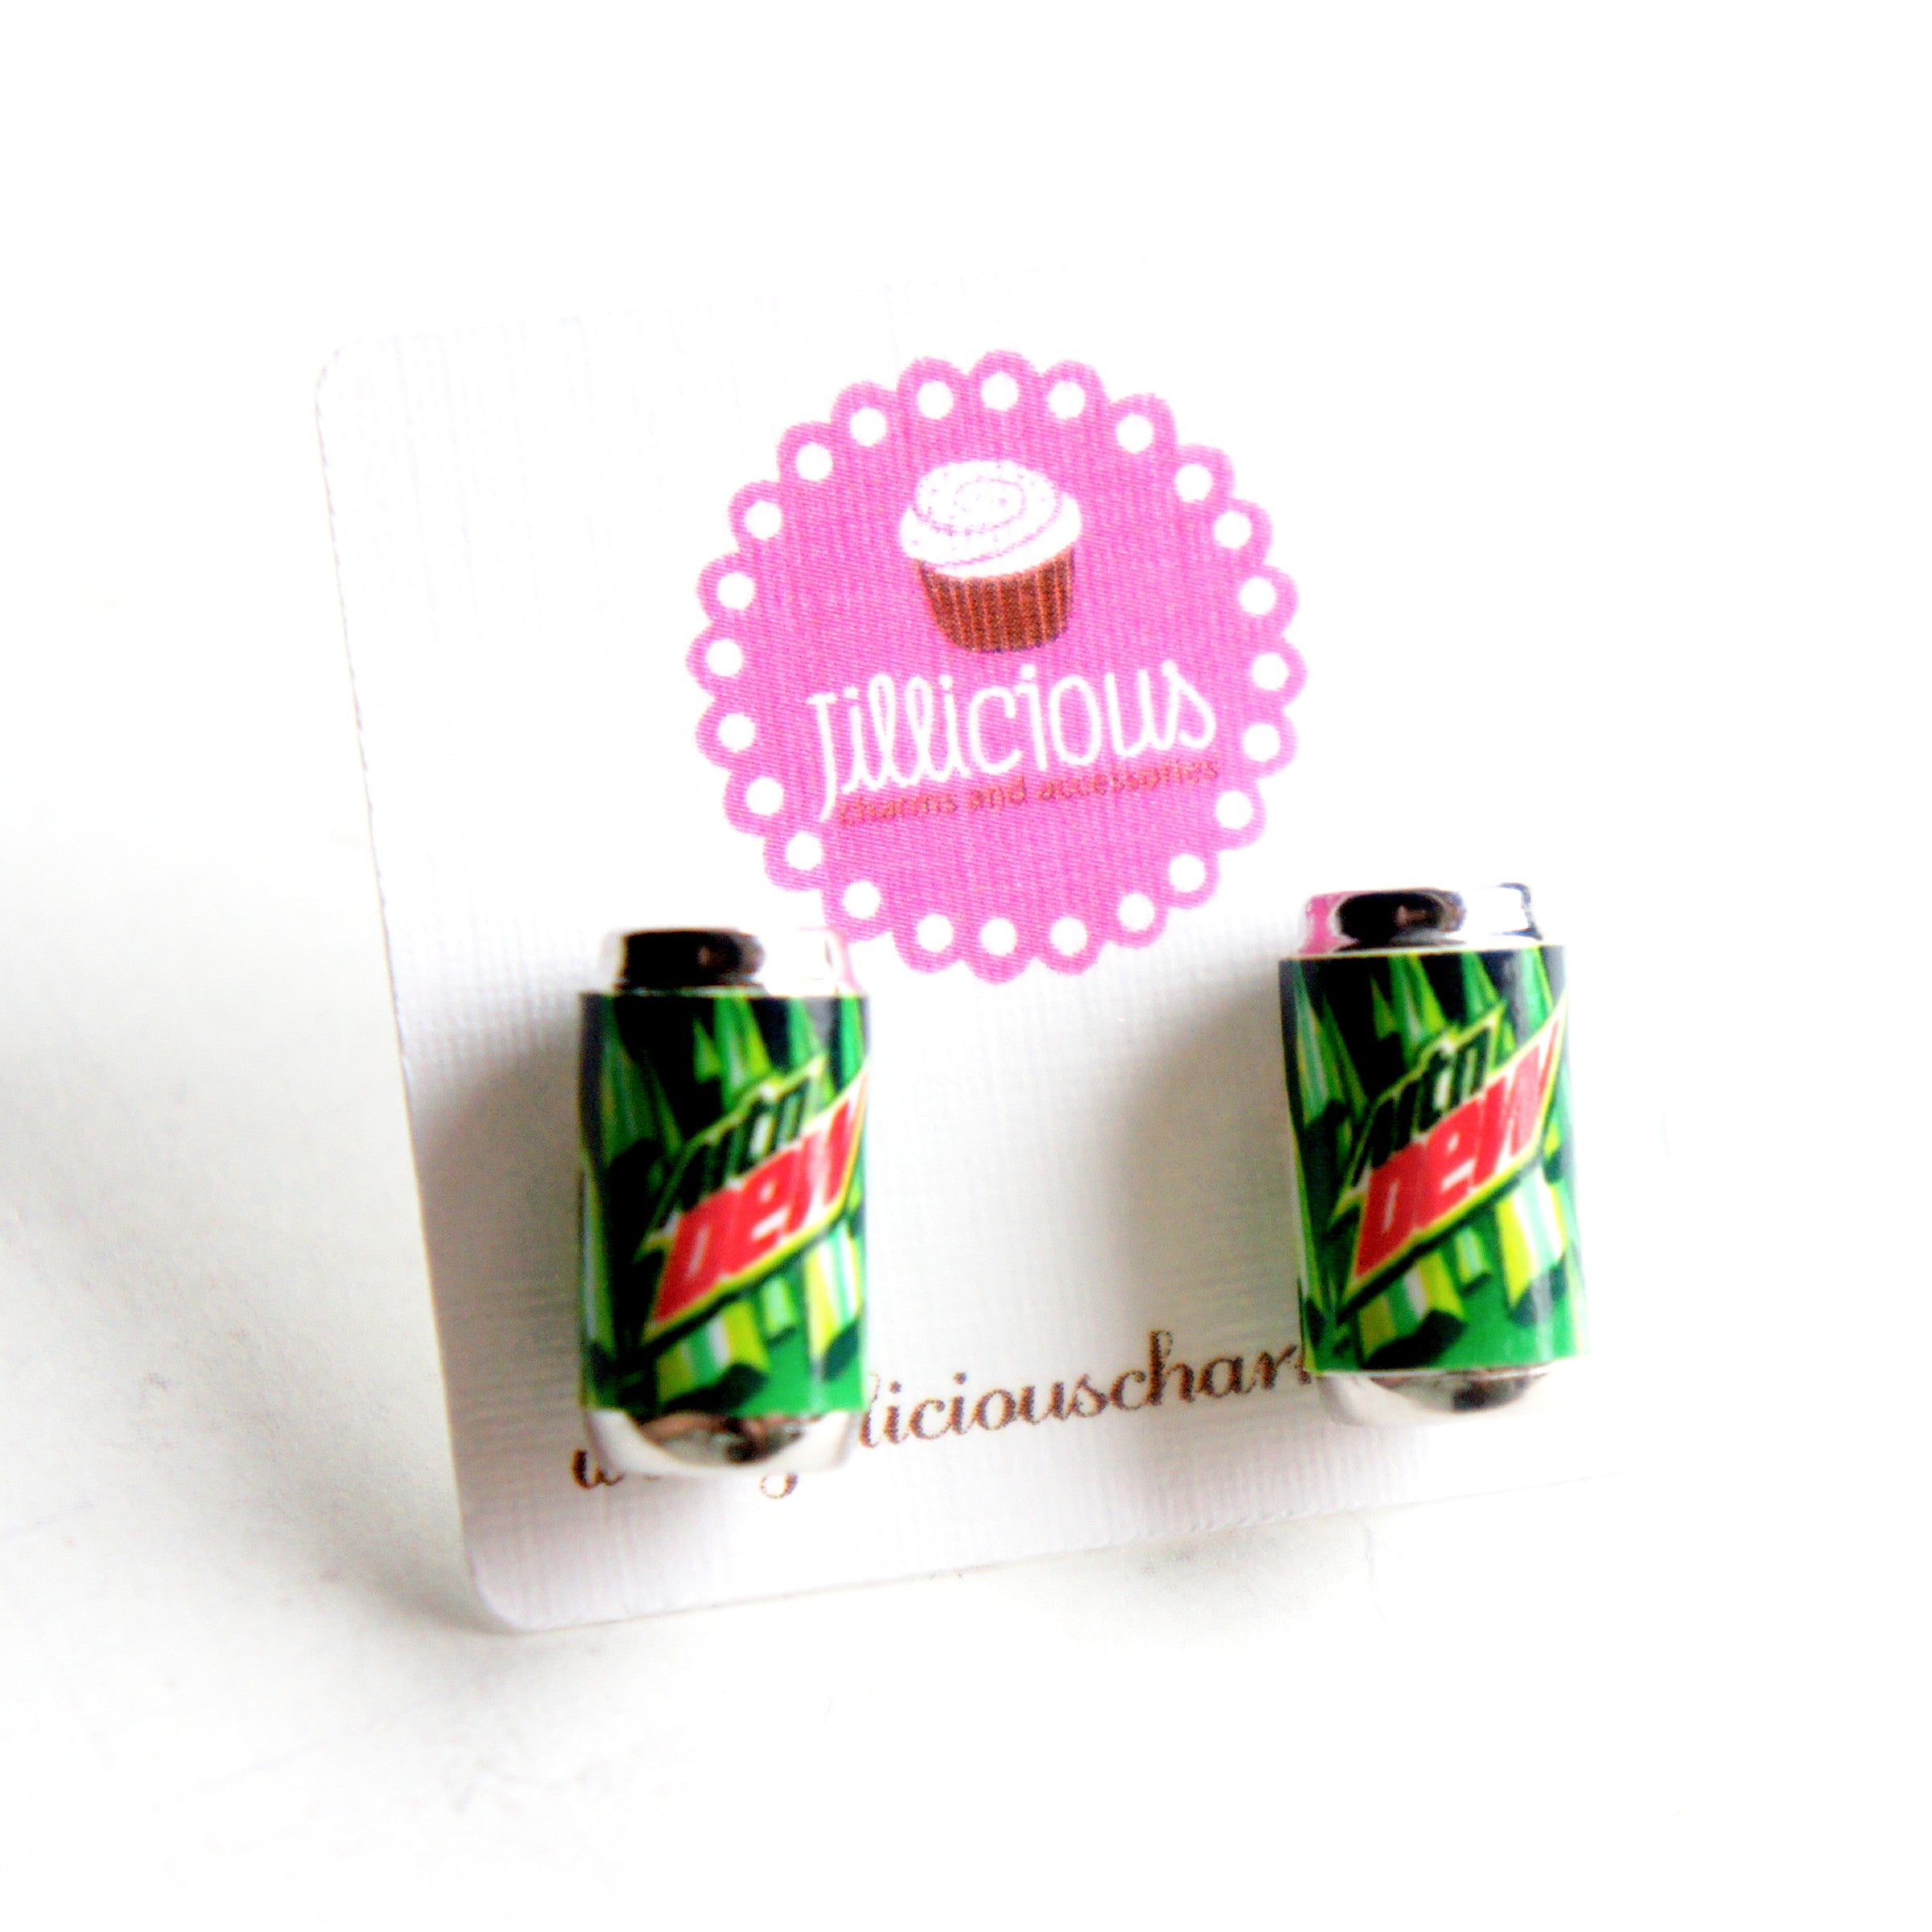 Mountain Dew Soda Can Earrings - Jillicious charms and accessories